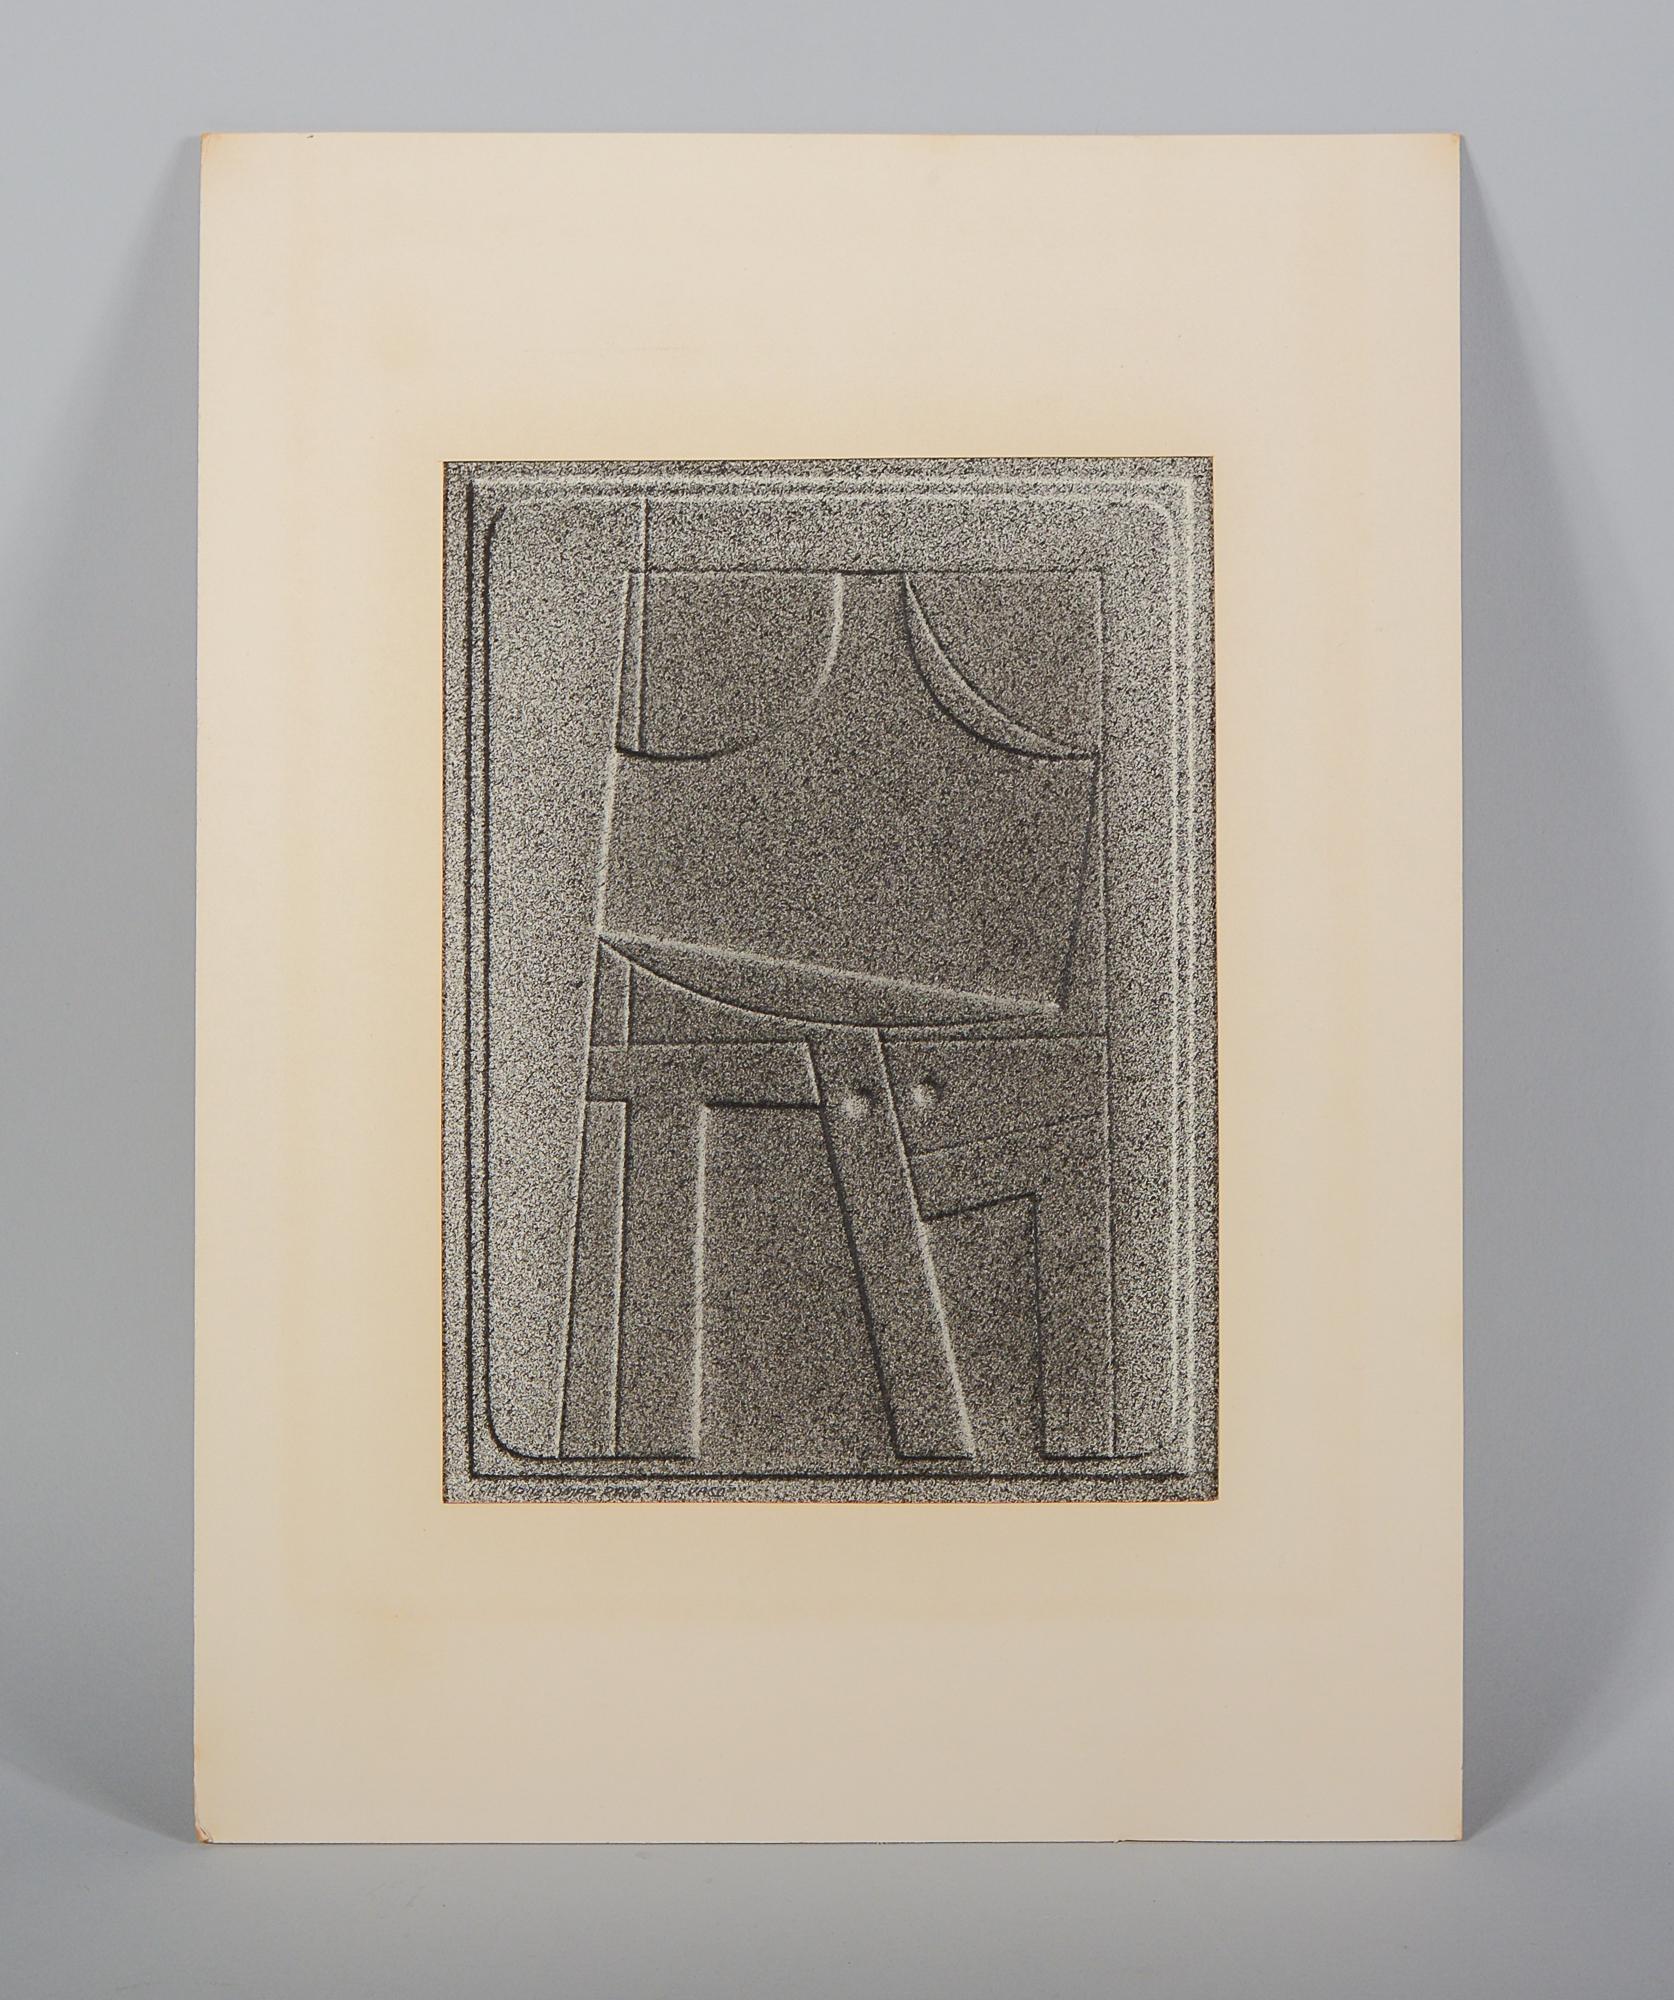 Intaglio print by Colombian artist Omar Rayo (1928-2010). This is signed in pencil lower left 